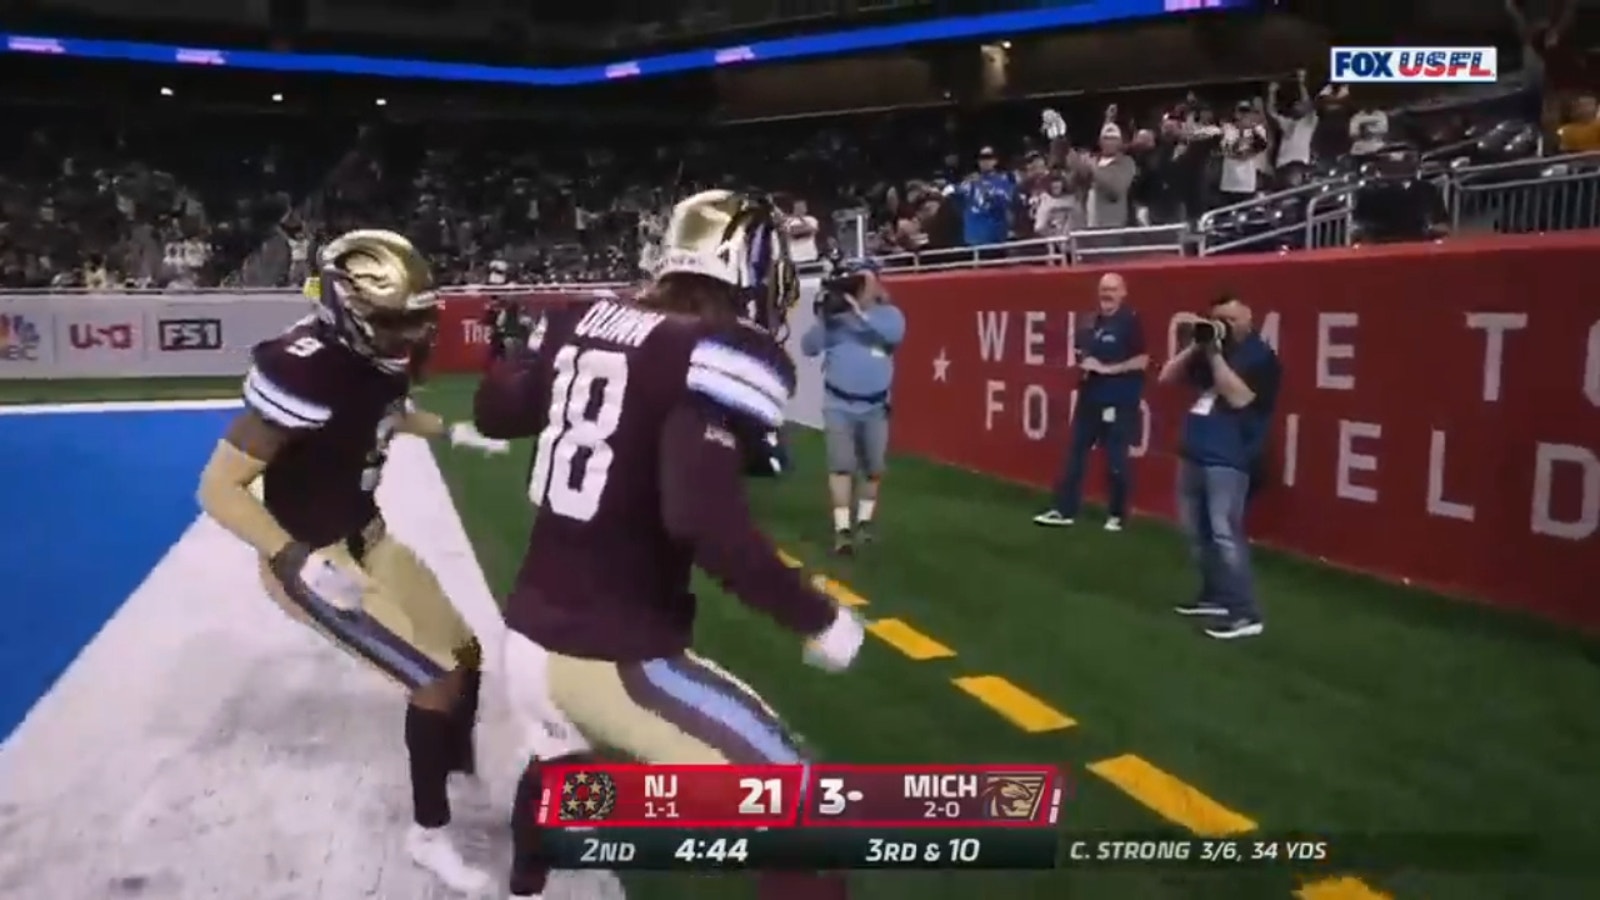 Trey Quinn connects with Carson Strong on BEAUTIFUL 28-yard TD